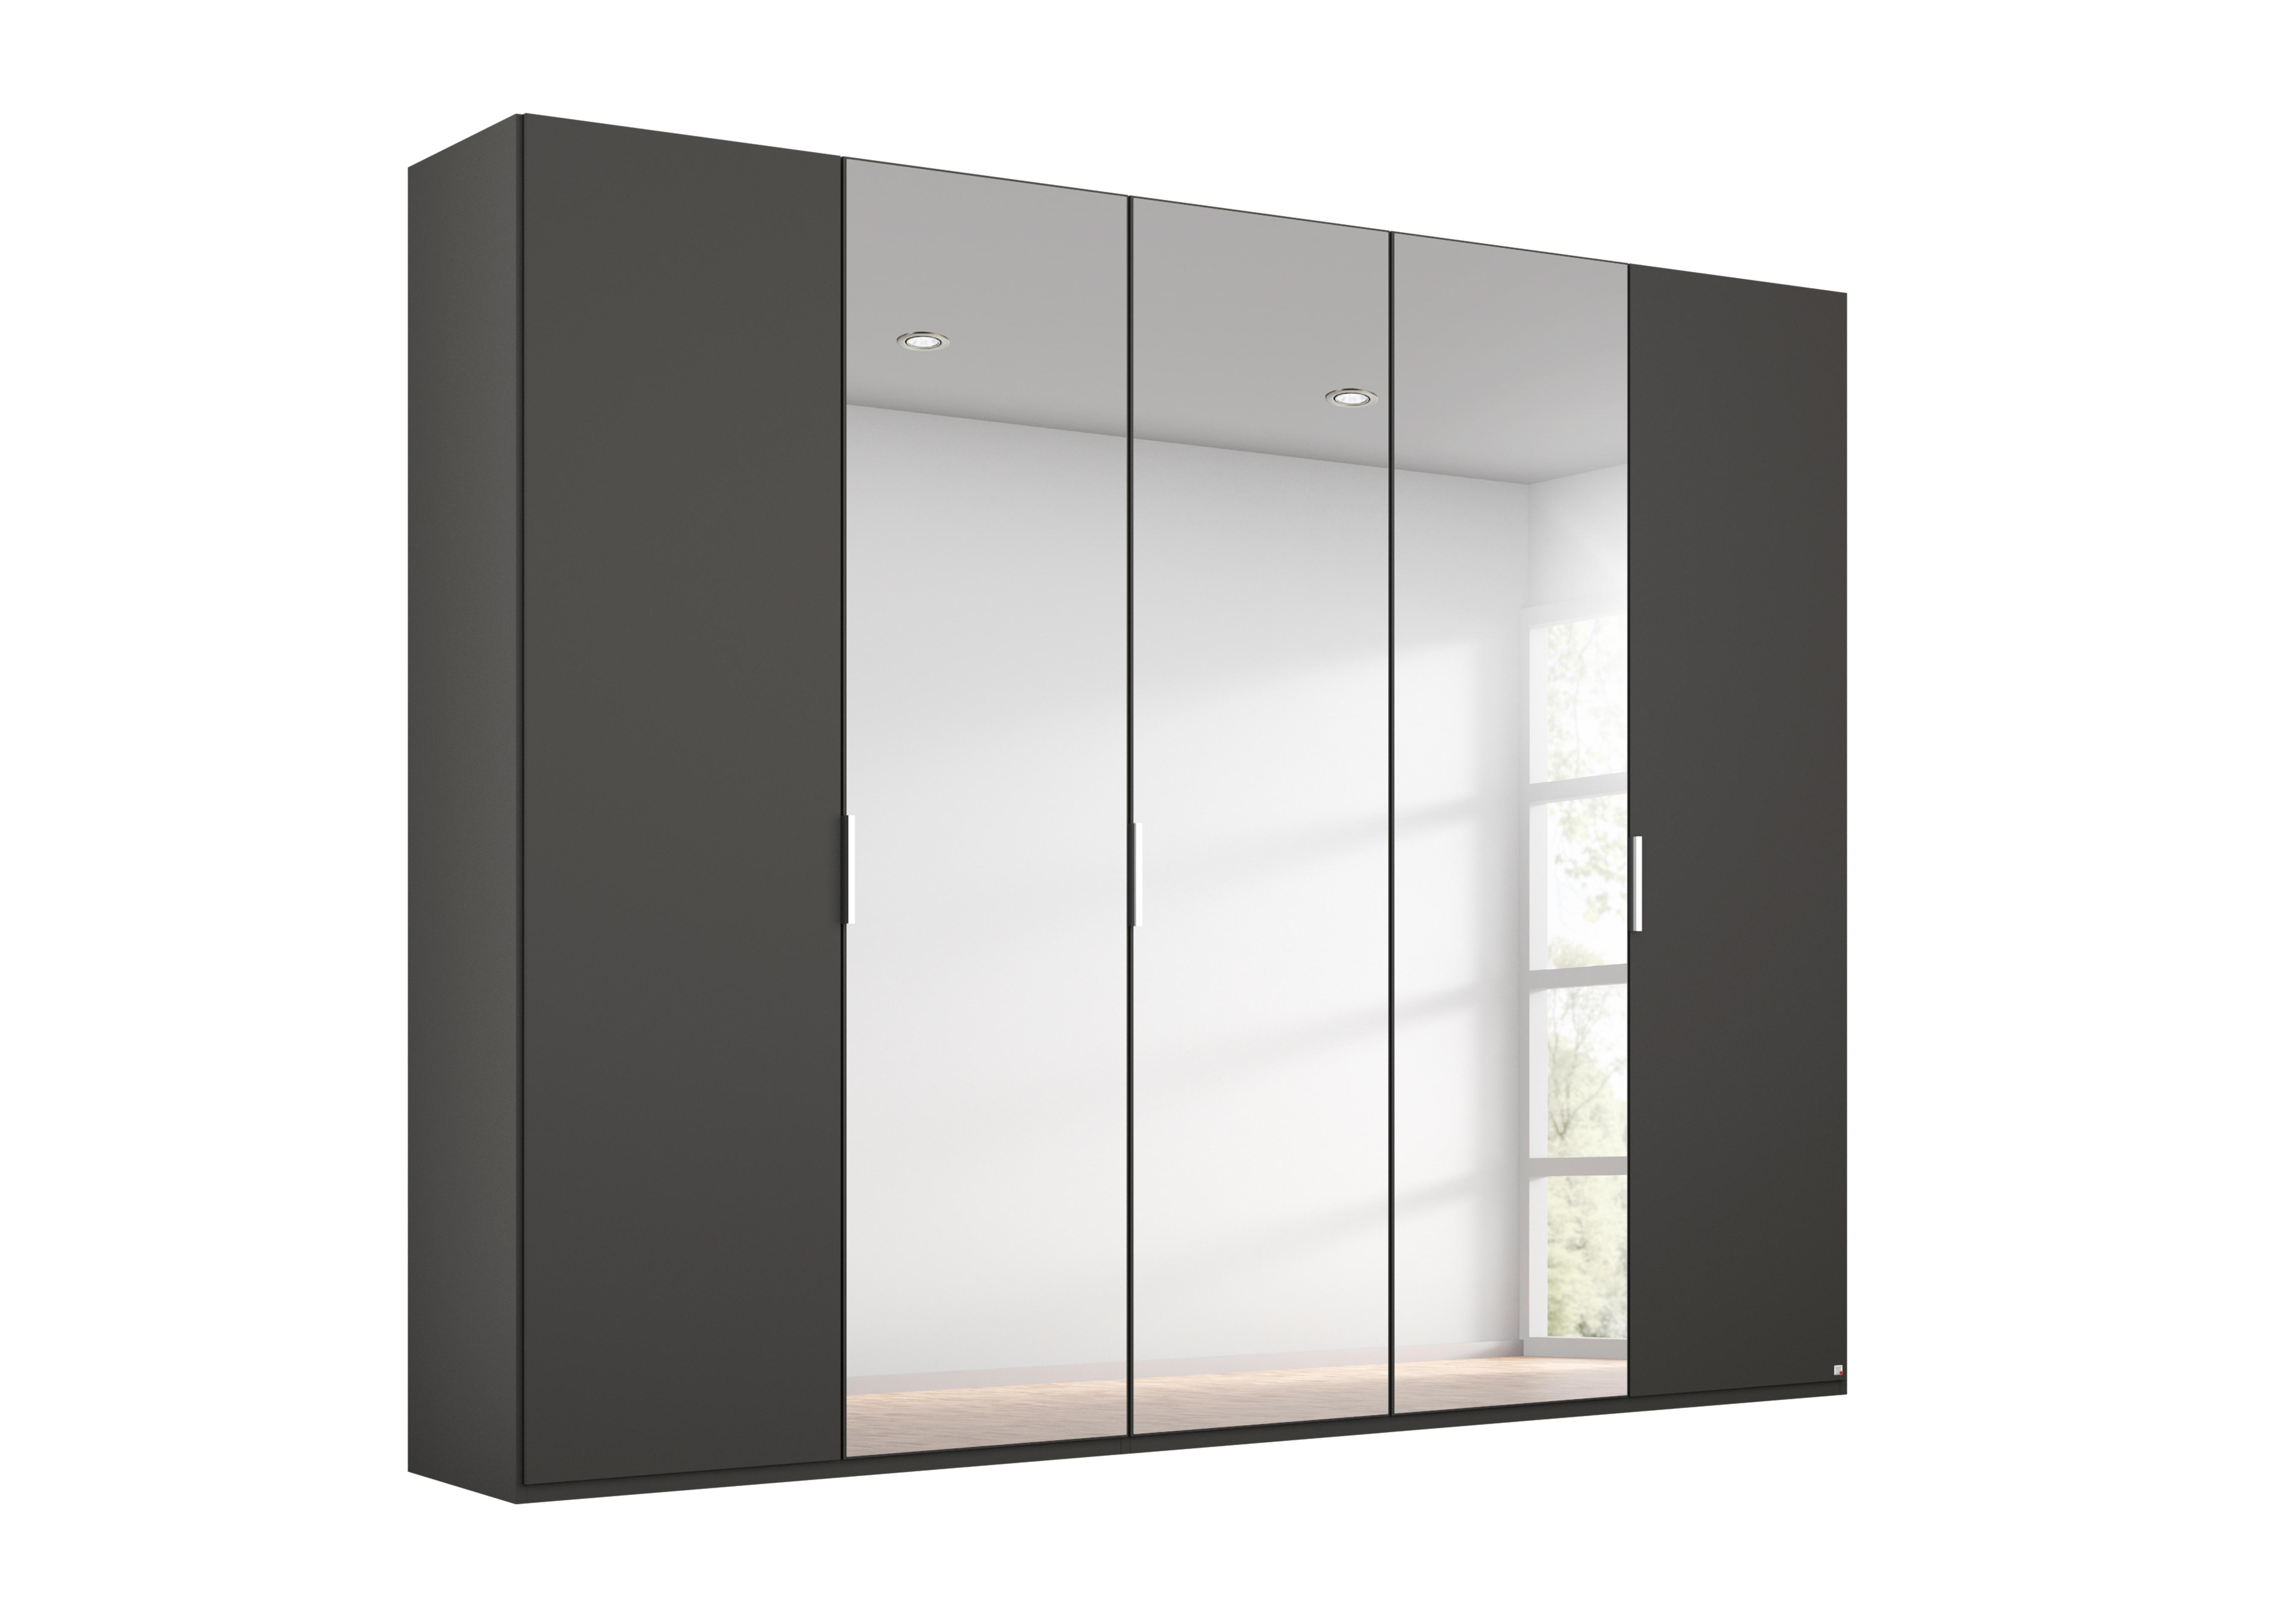 Formes Decor 5 Door Hinged Wardrobe with 3 Mirrors in A138b Graphite on Furniture Village